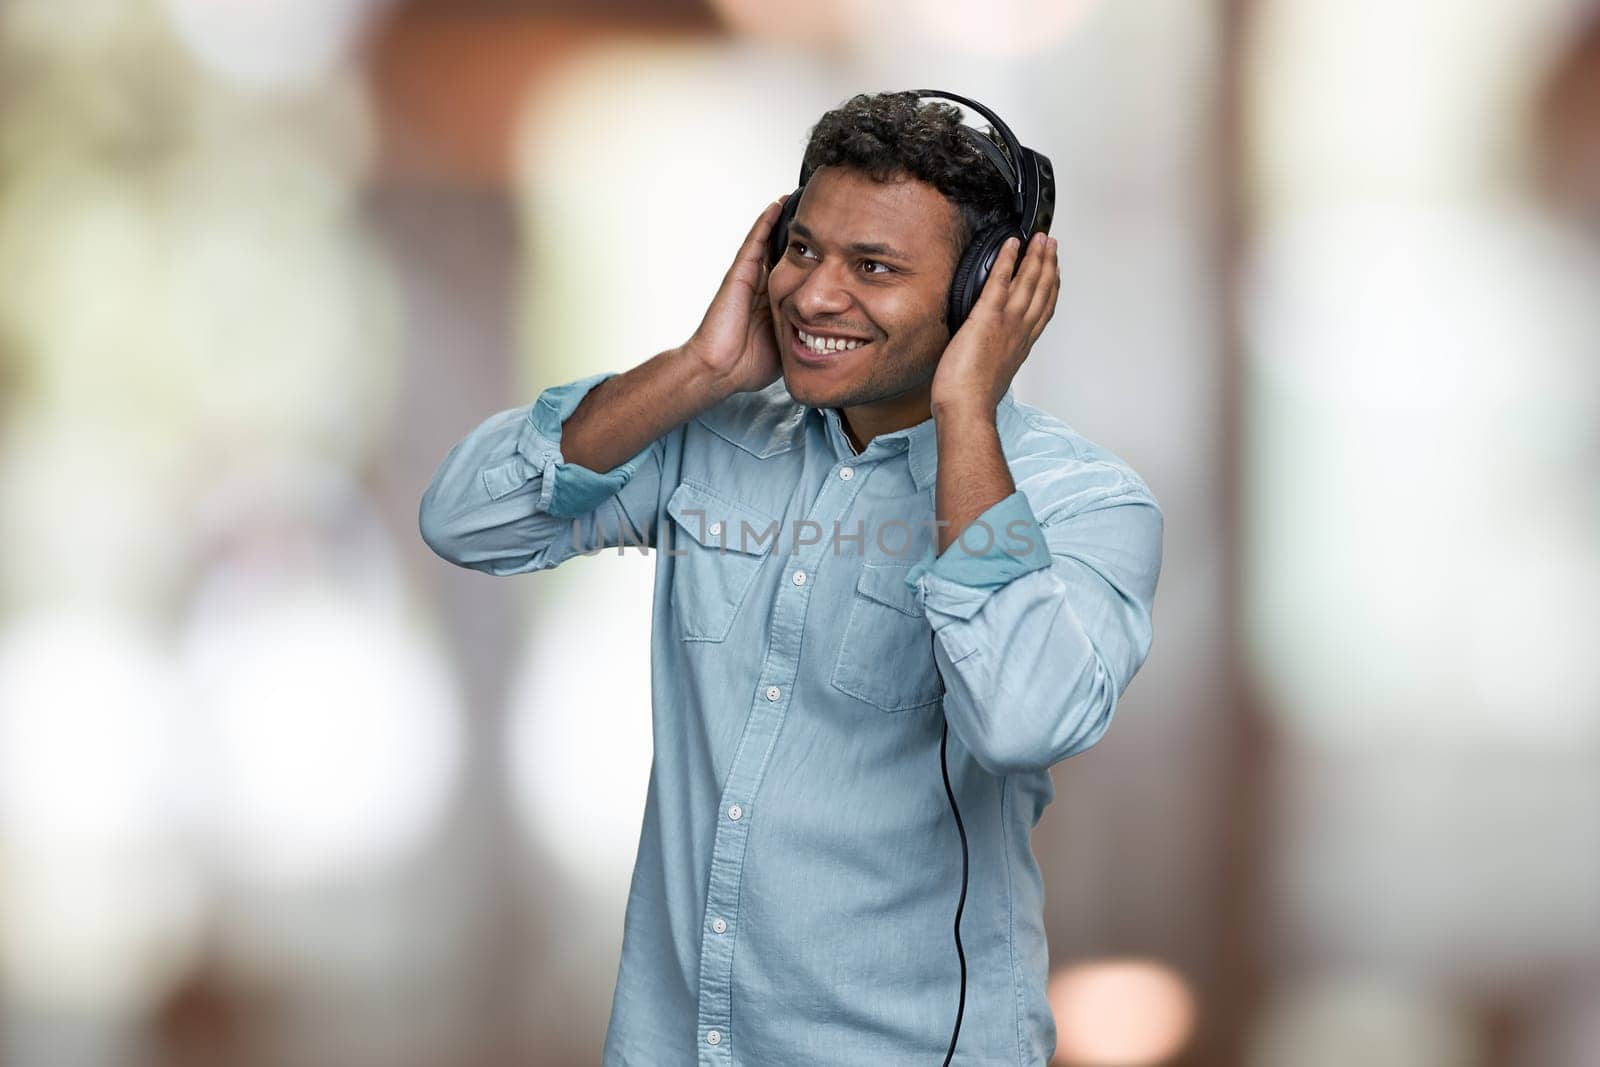 Cheerful young indian man listening music with headphones. Interior blur background. People, leisure and fun concept.